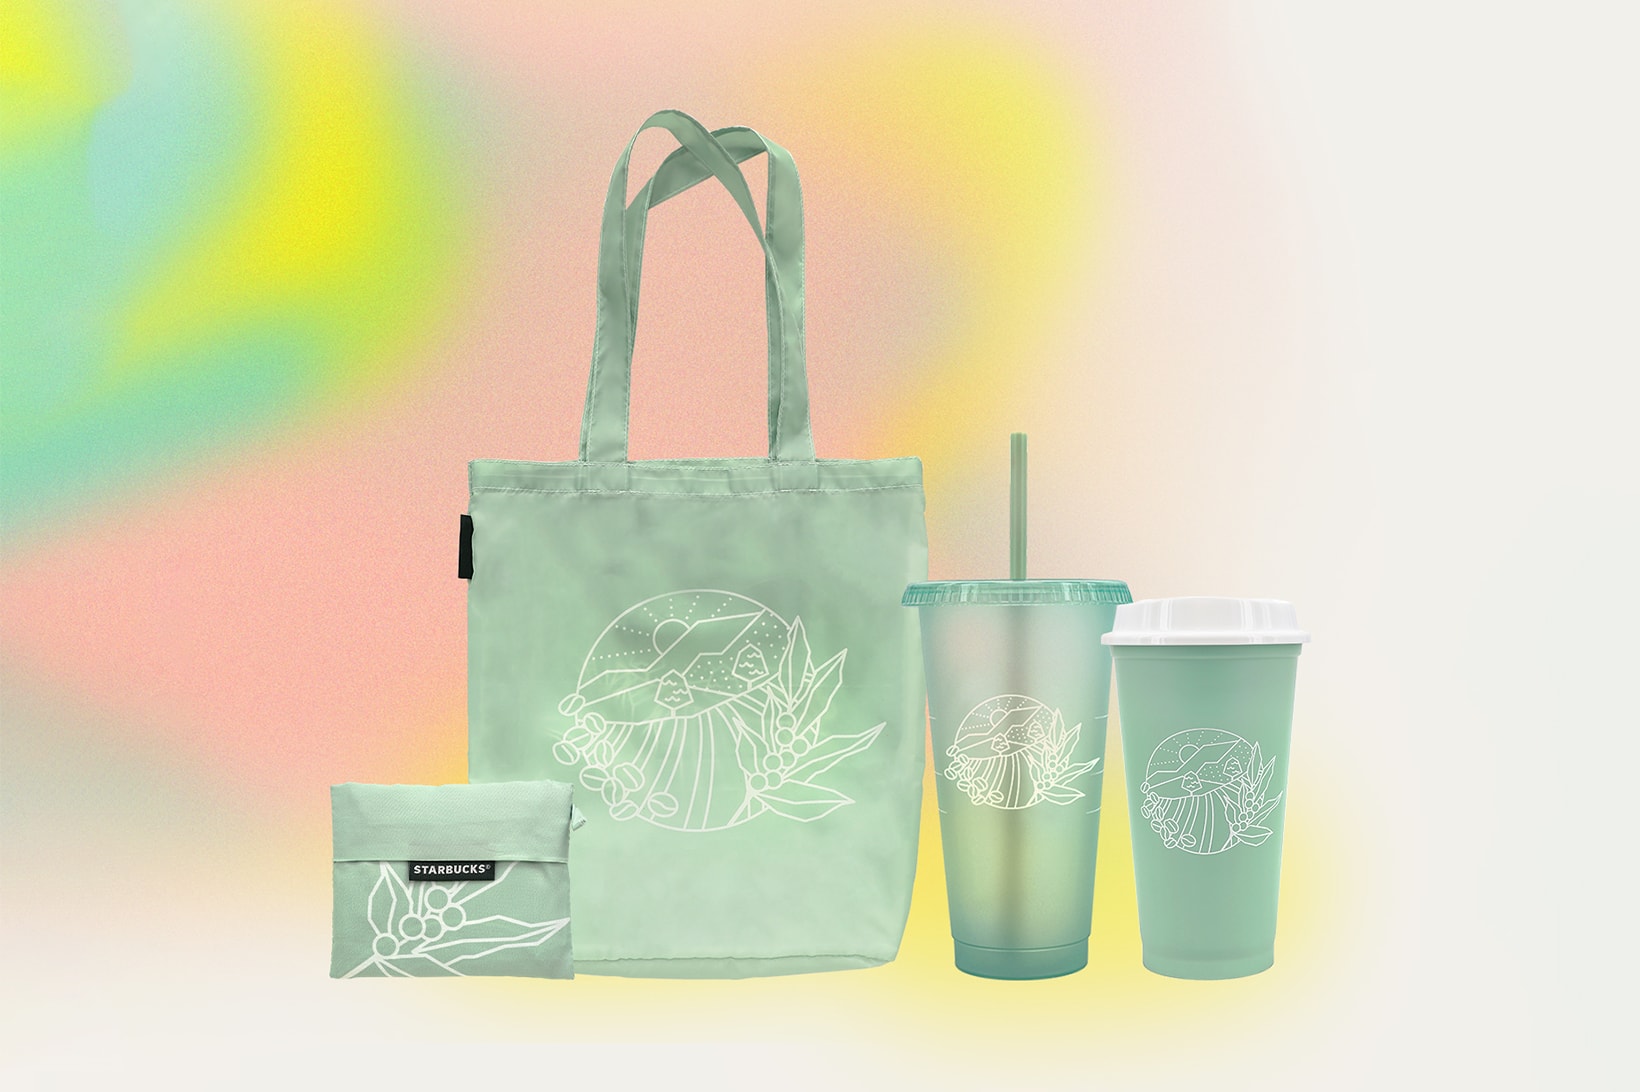 starbucks earth month merchandise tumblers glass water bottle cup sustainable reusable tote bag